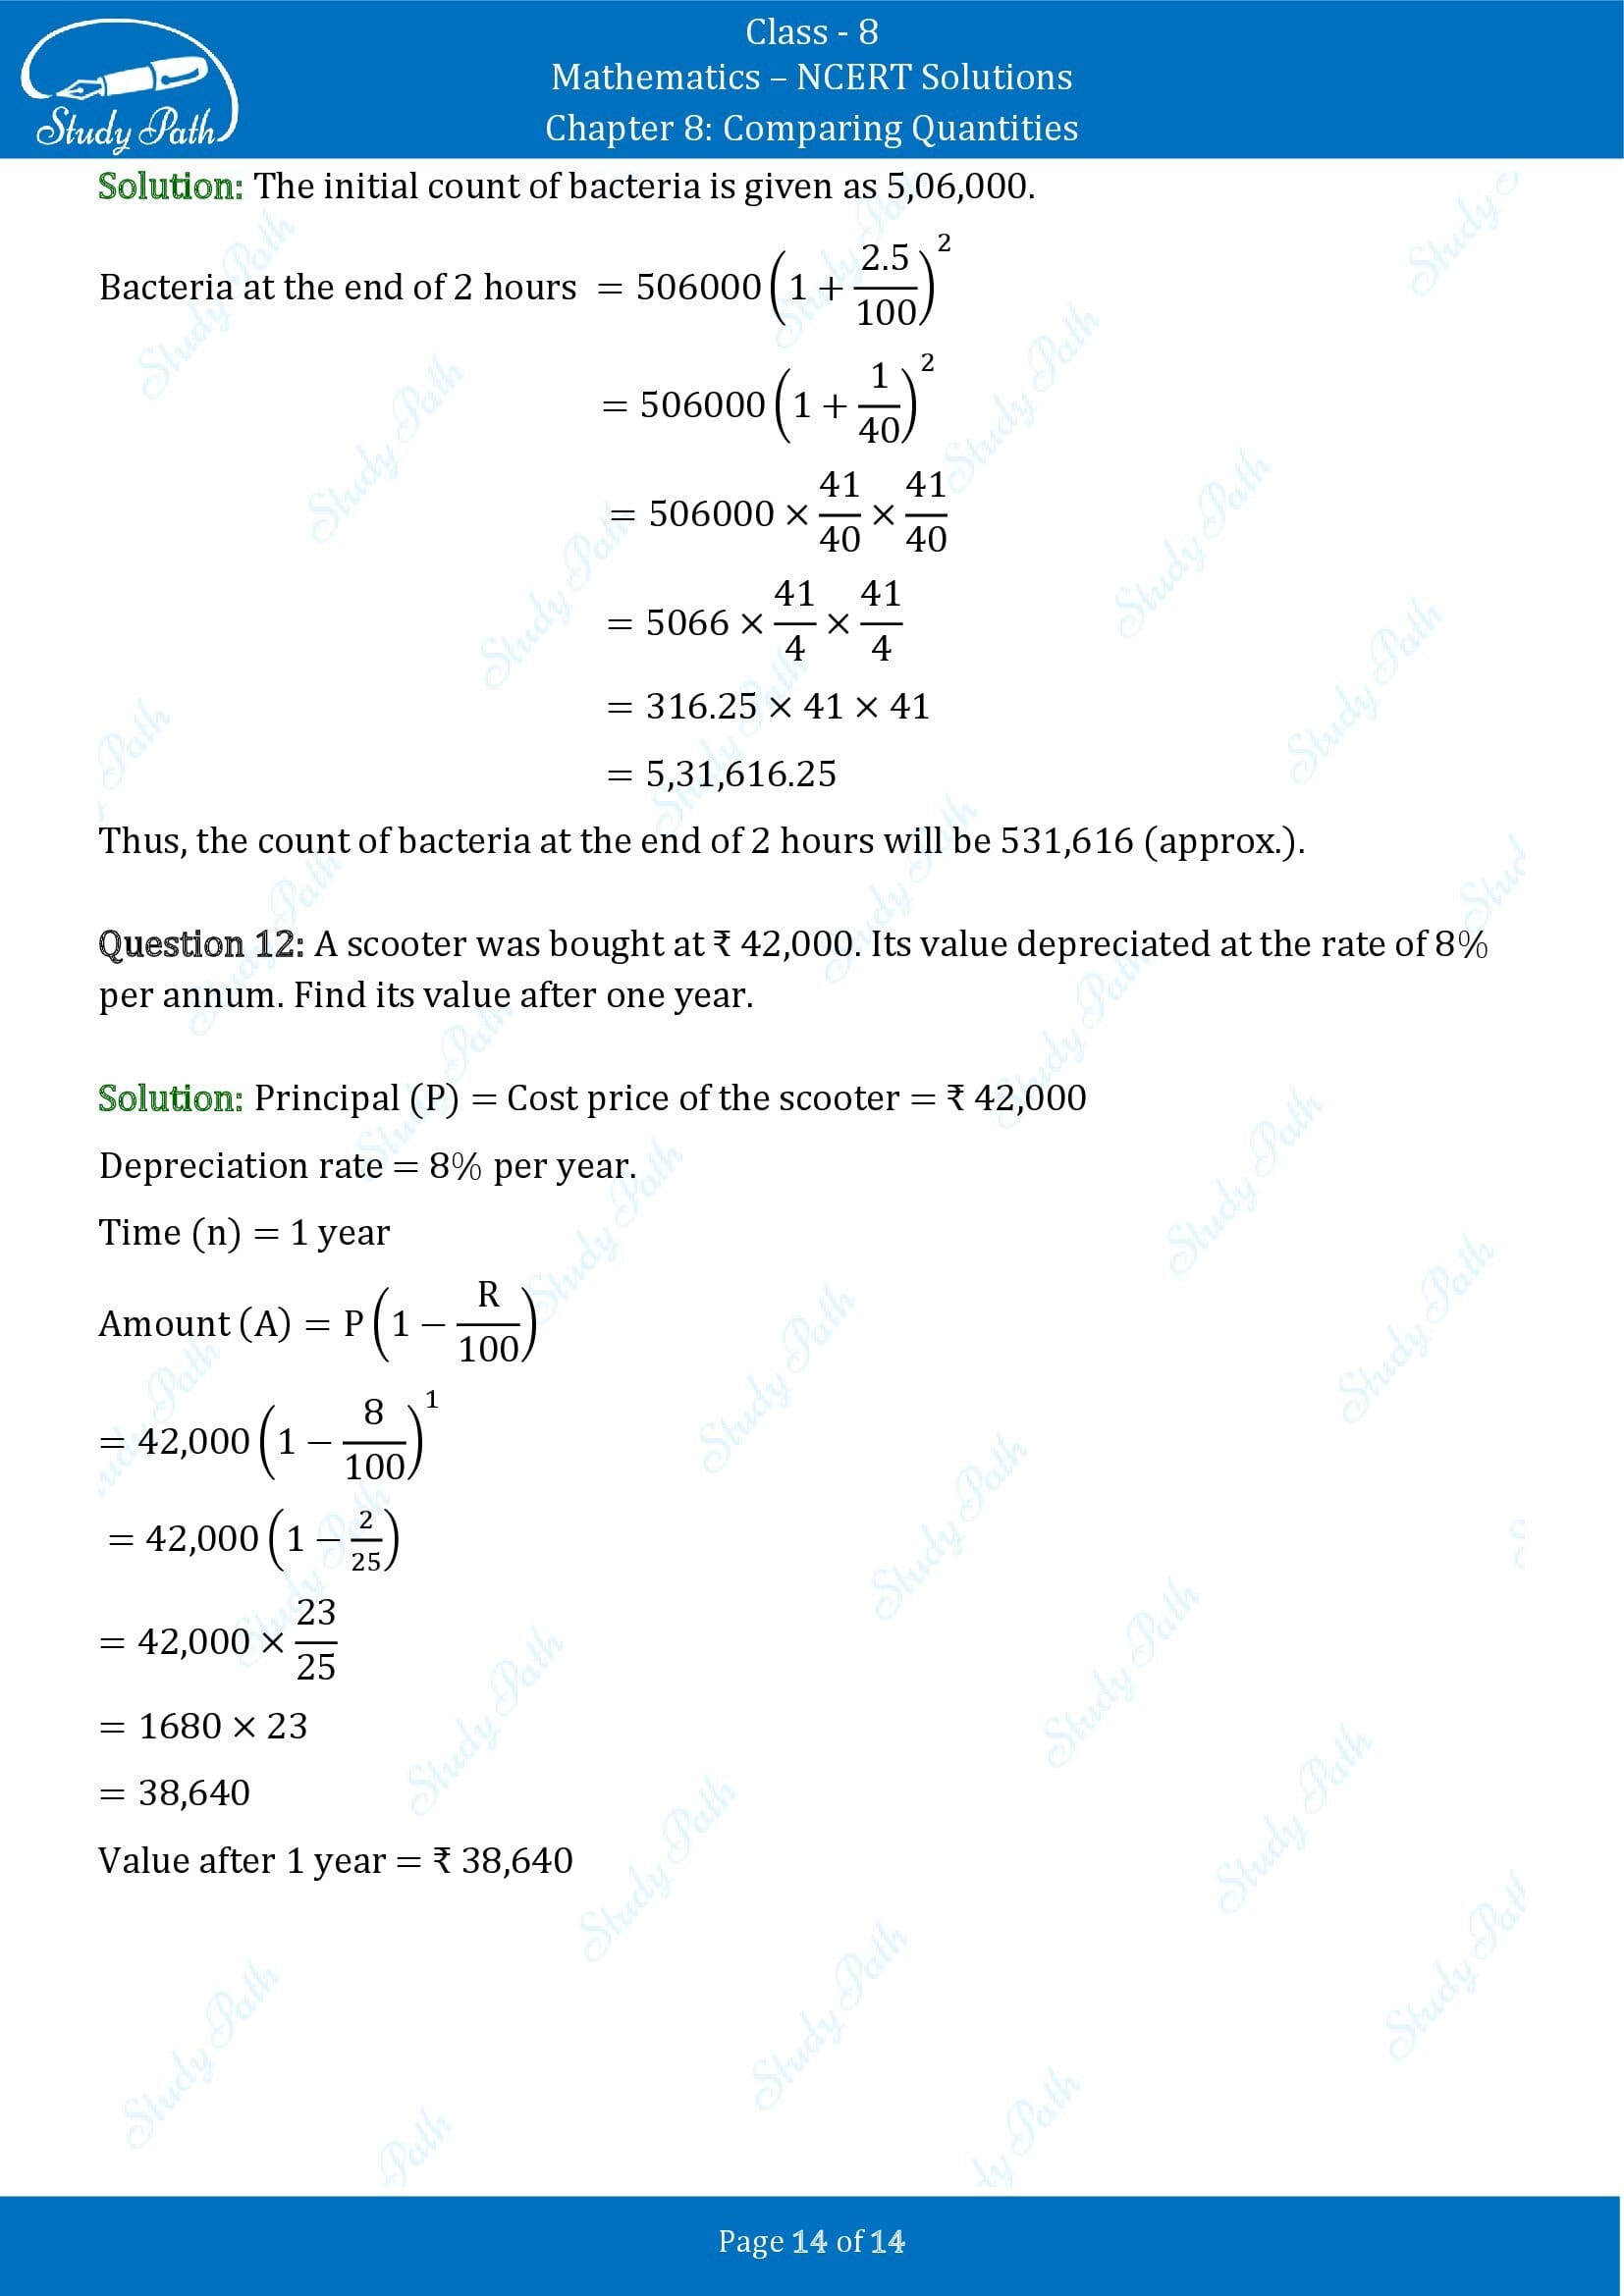 NCERT Solutions for Class 8 Maths Chapter 8 Comparing Quantities Exercise 8.3 00014